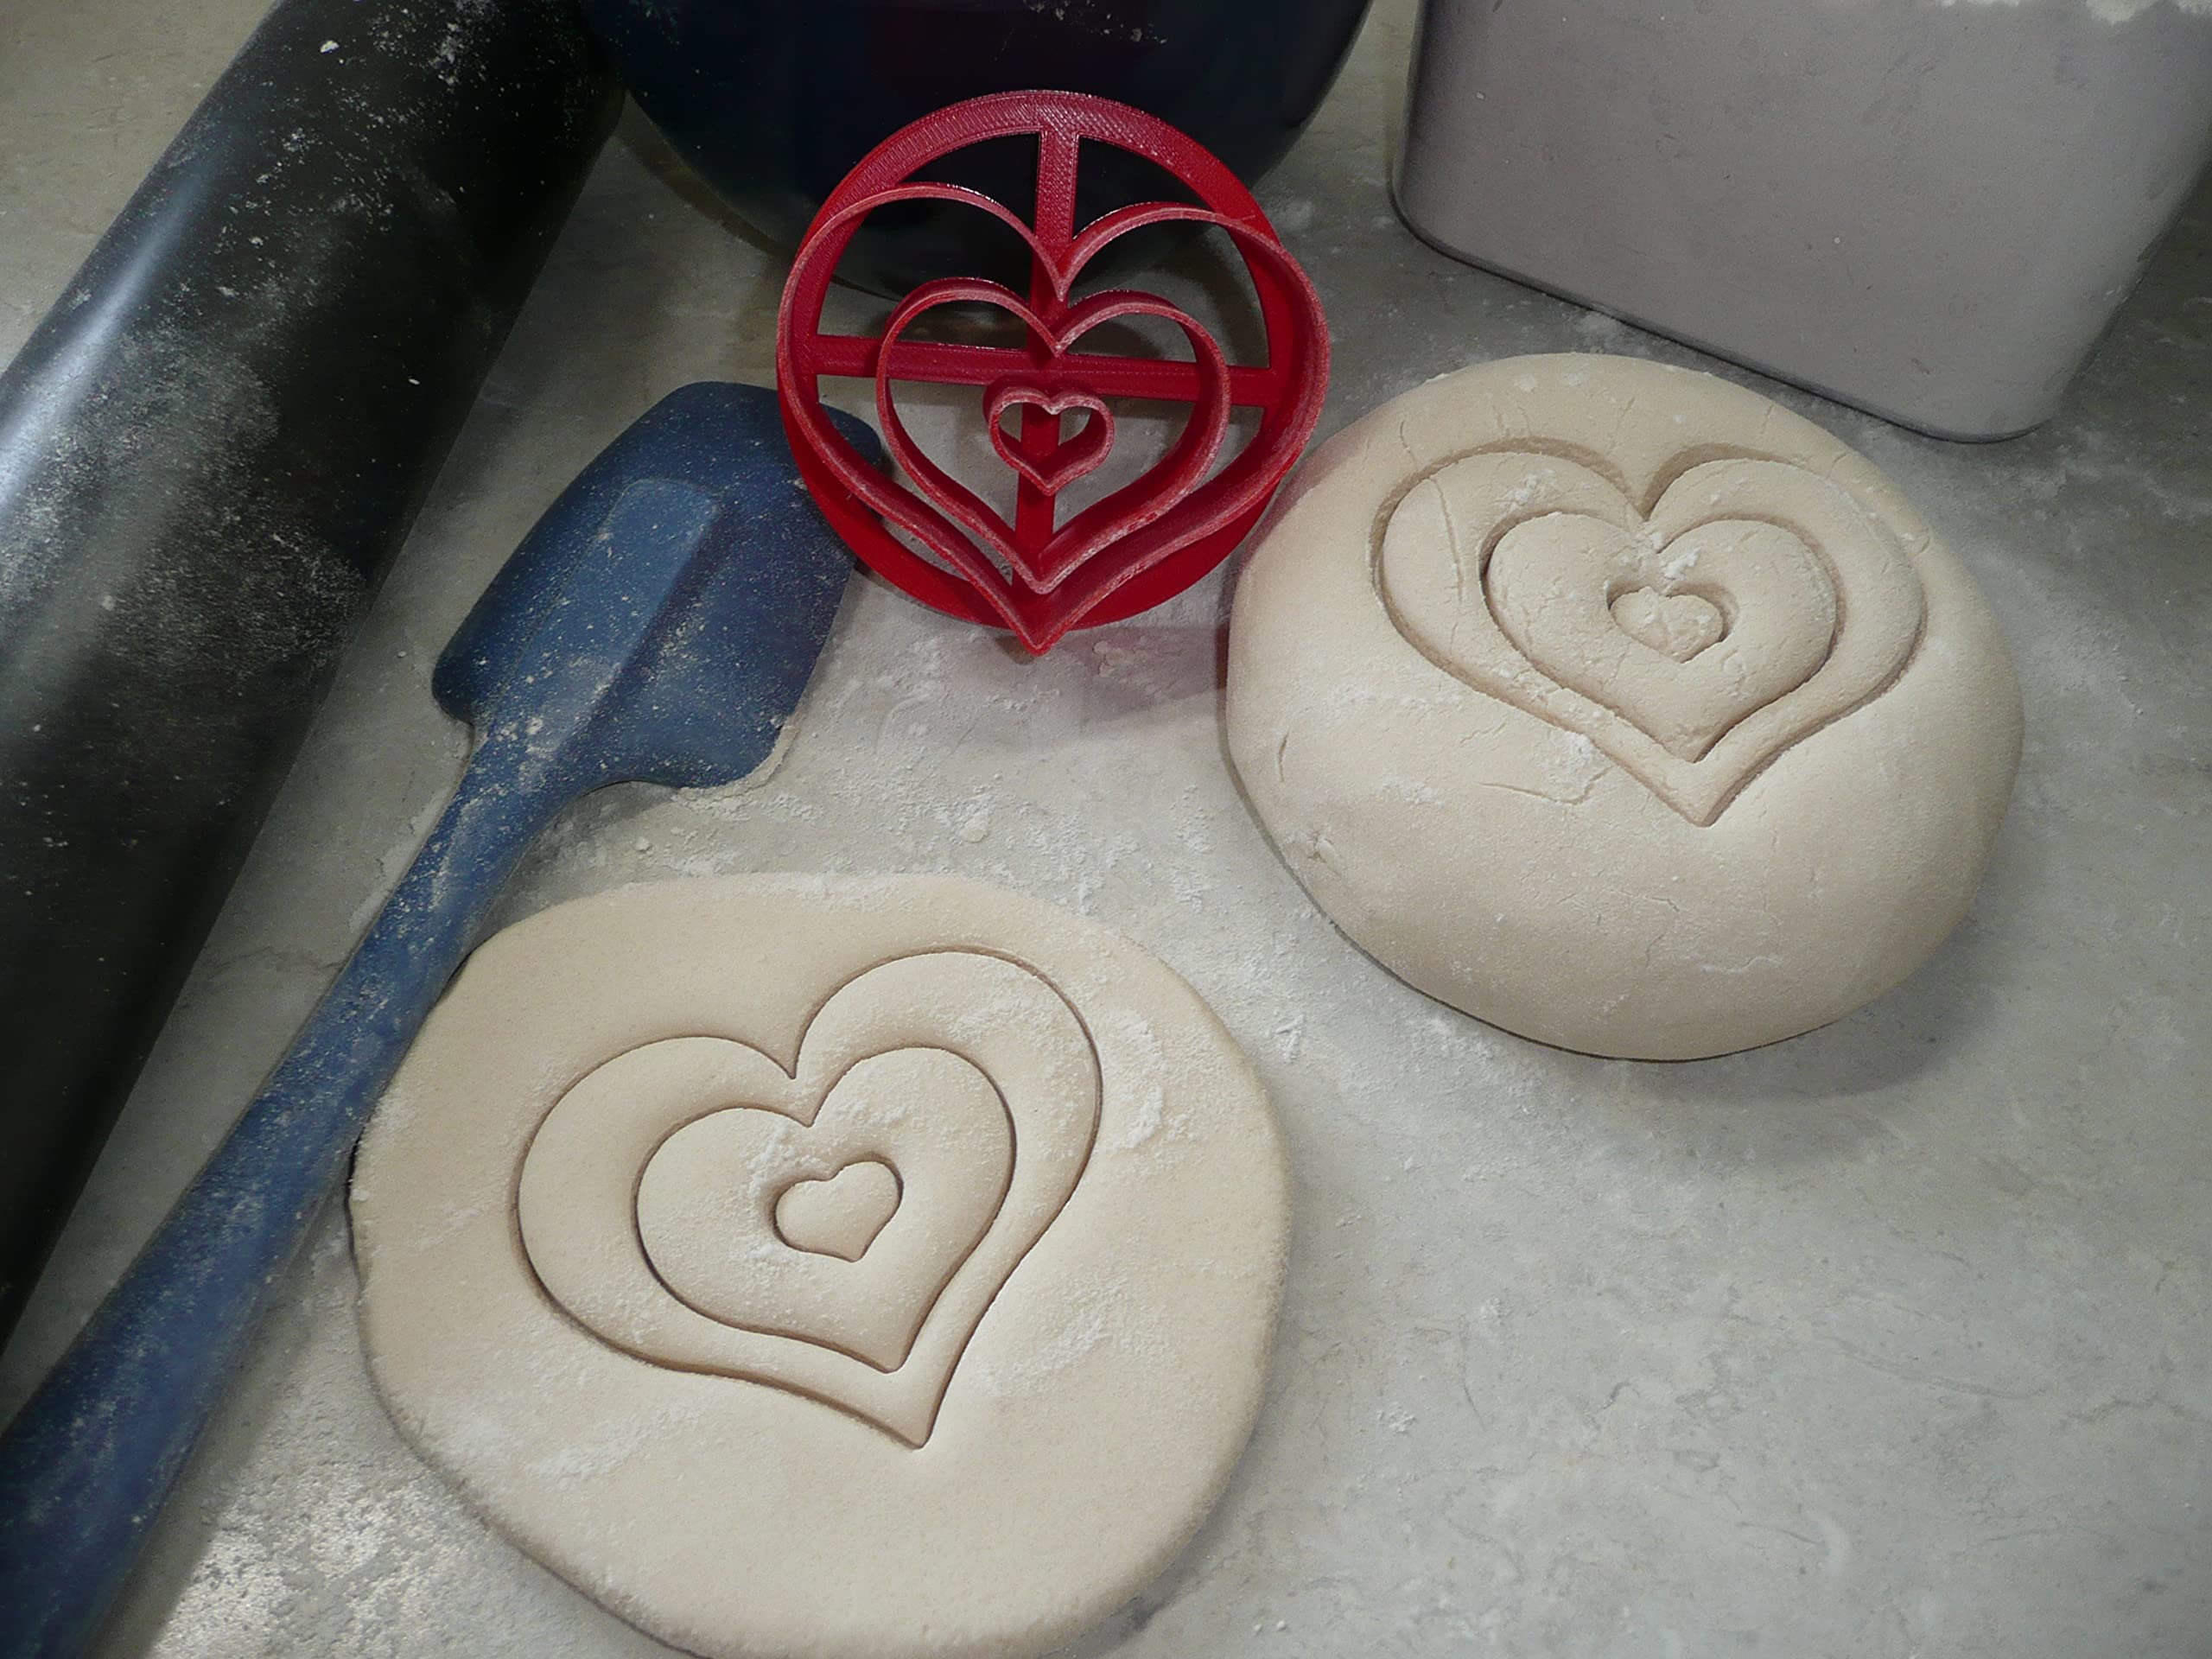 YNGLLC LOVE THEMED HEART ROSE DESIGNS SET OF 2 CONCHA CUTTERS MEXICAN SWEET BREAD STAMP MADE IN USA PR1632, Red